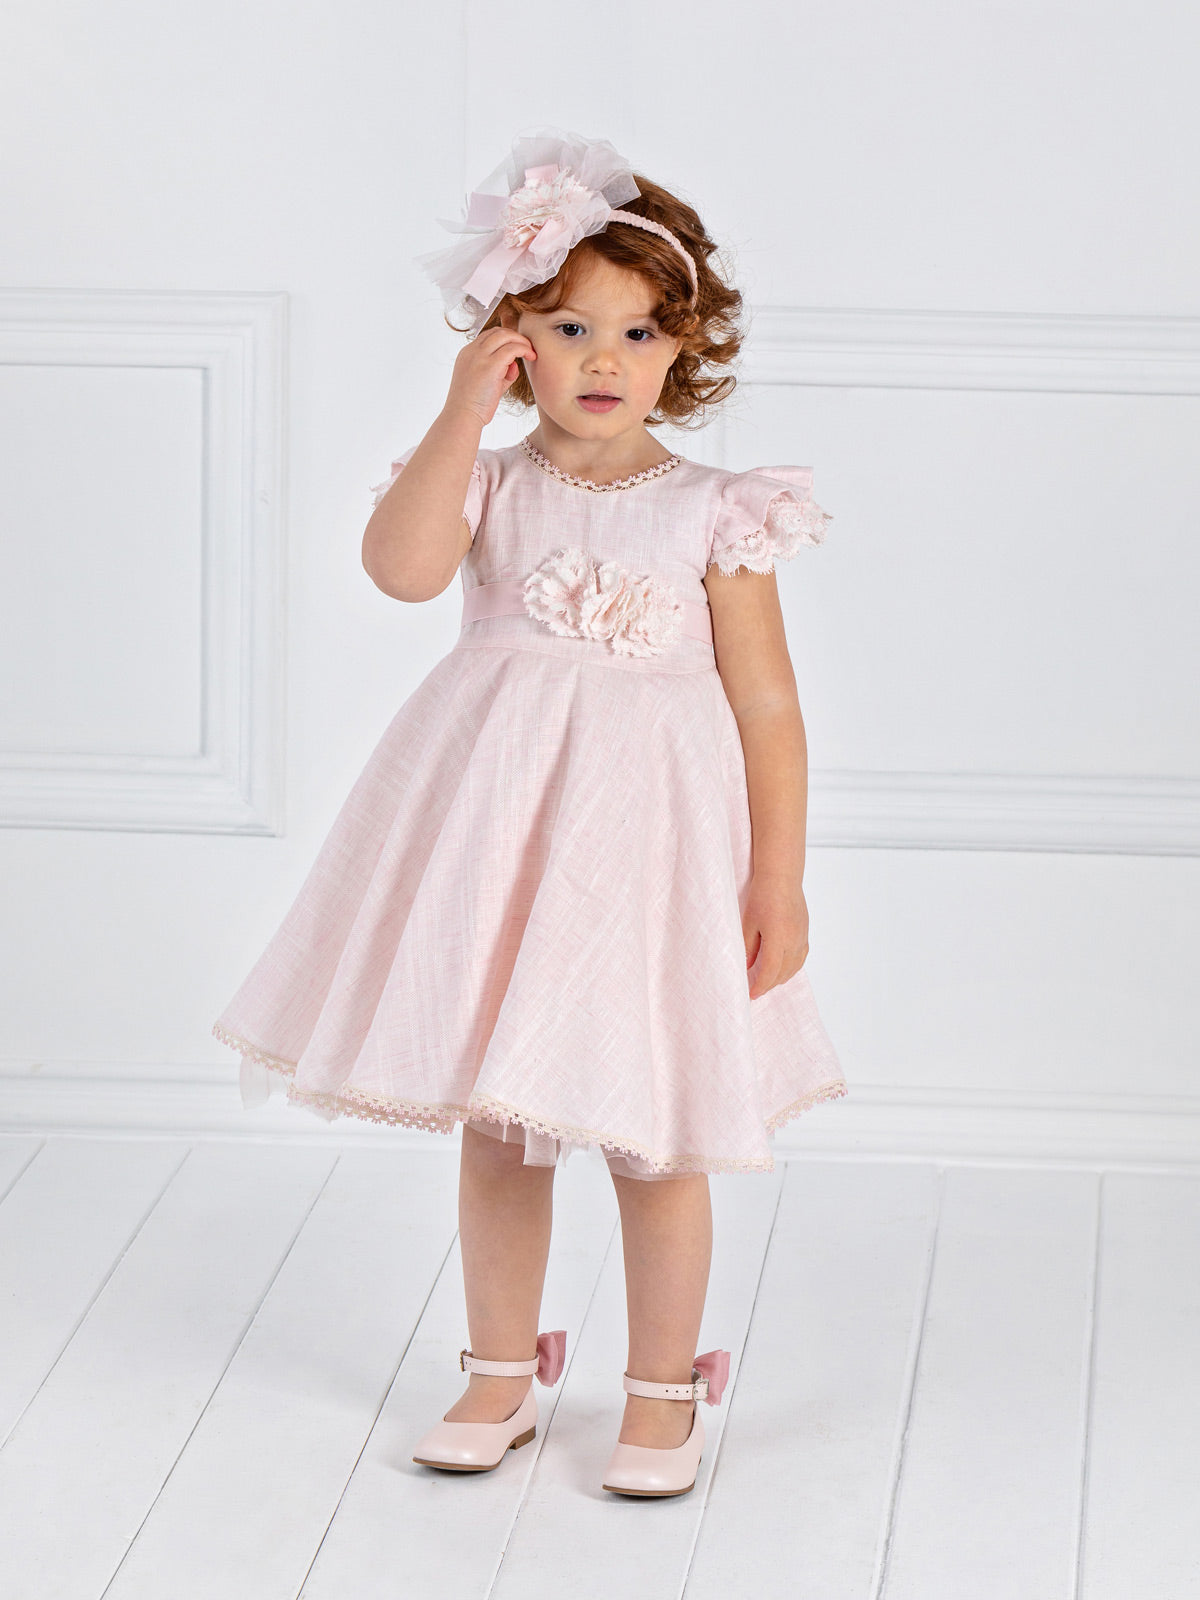 Baptism Clothes & Accessories for Girl